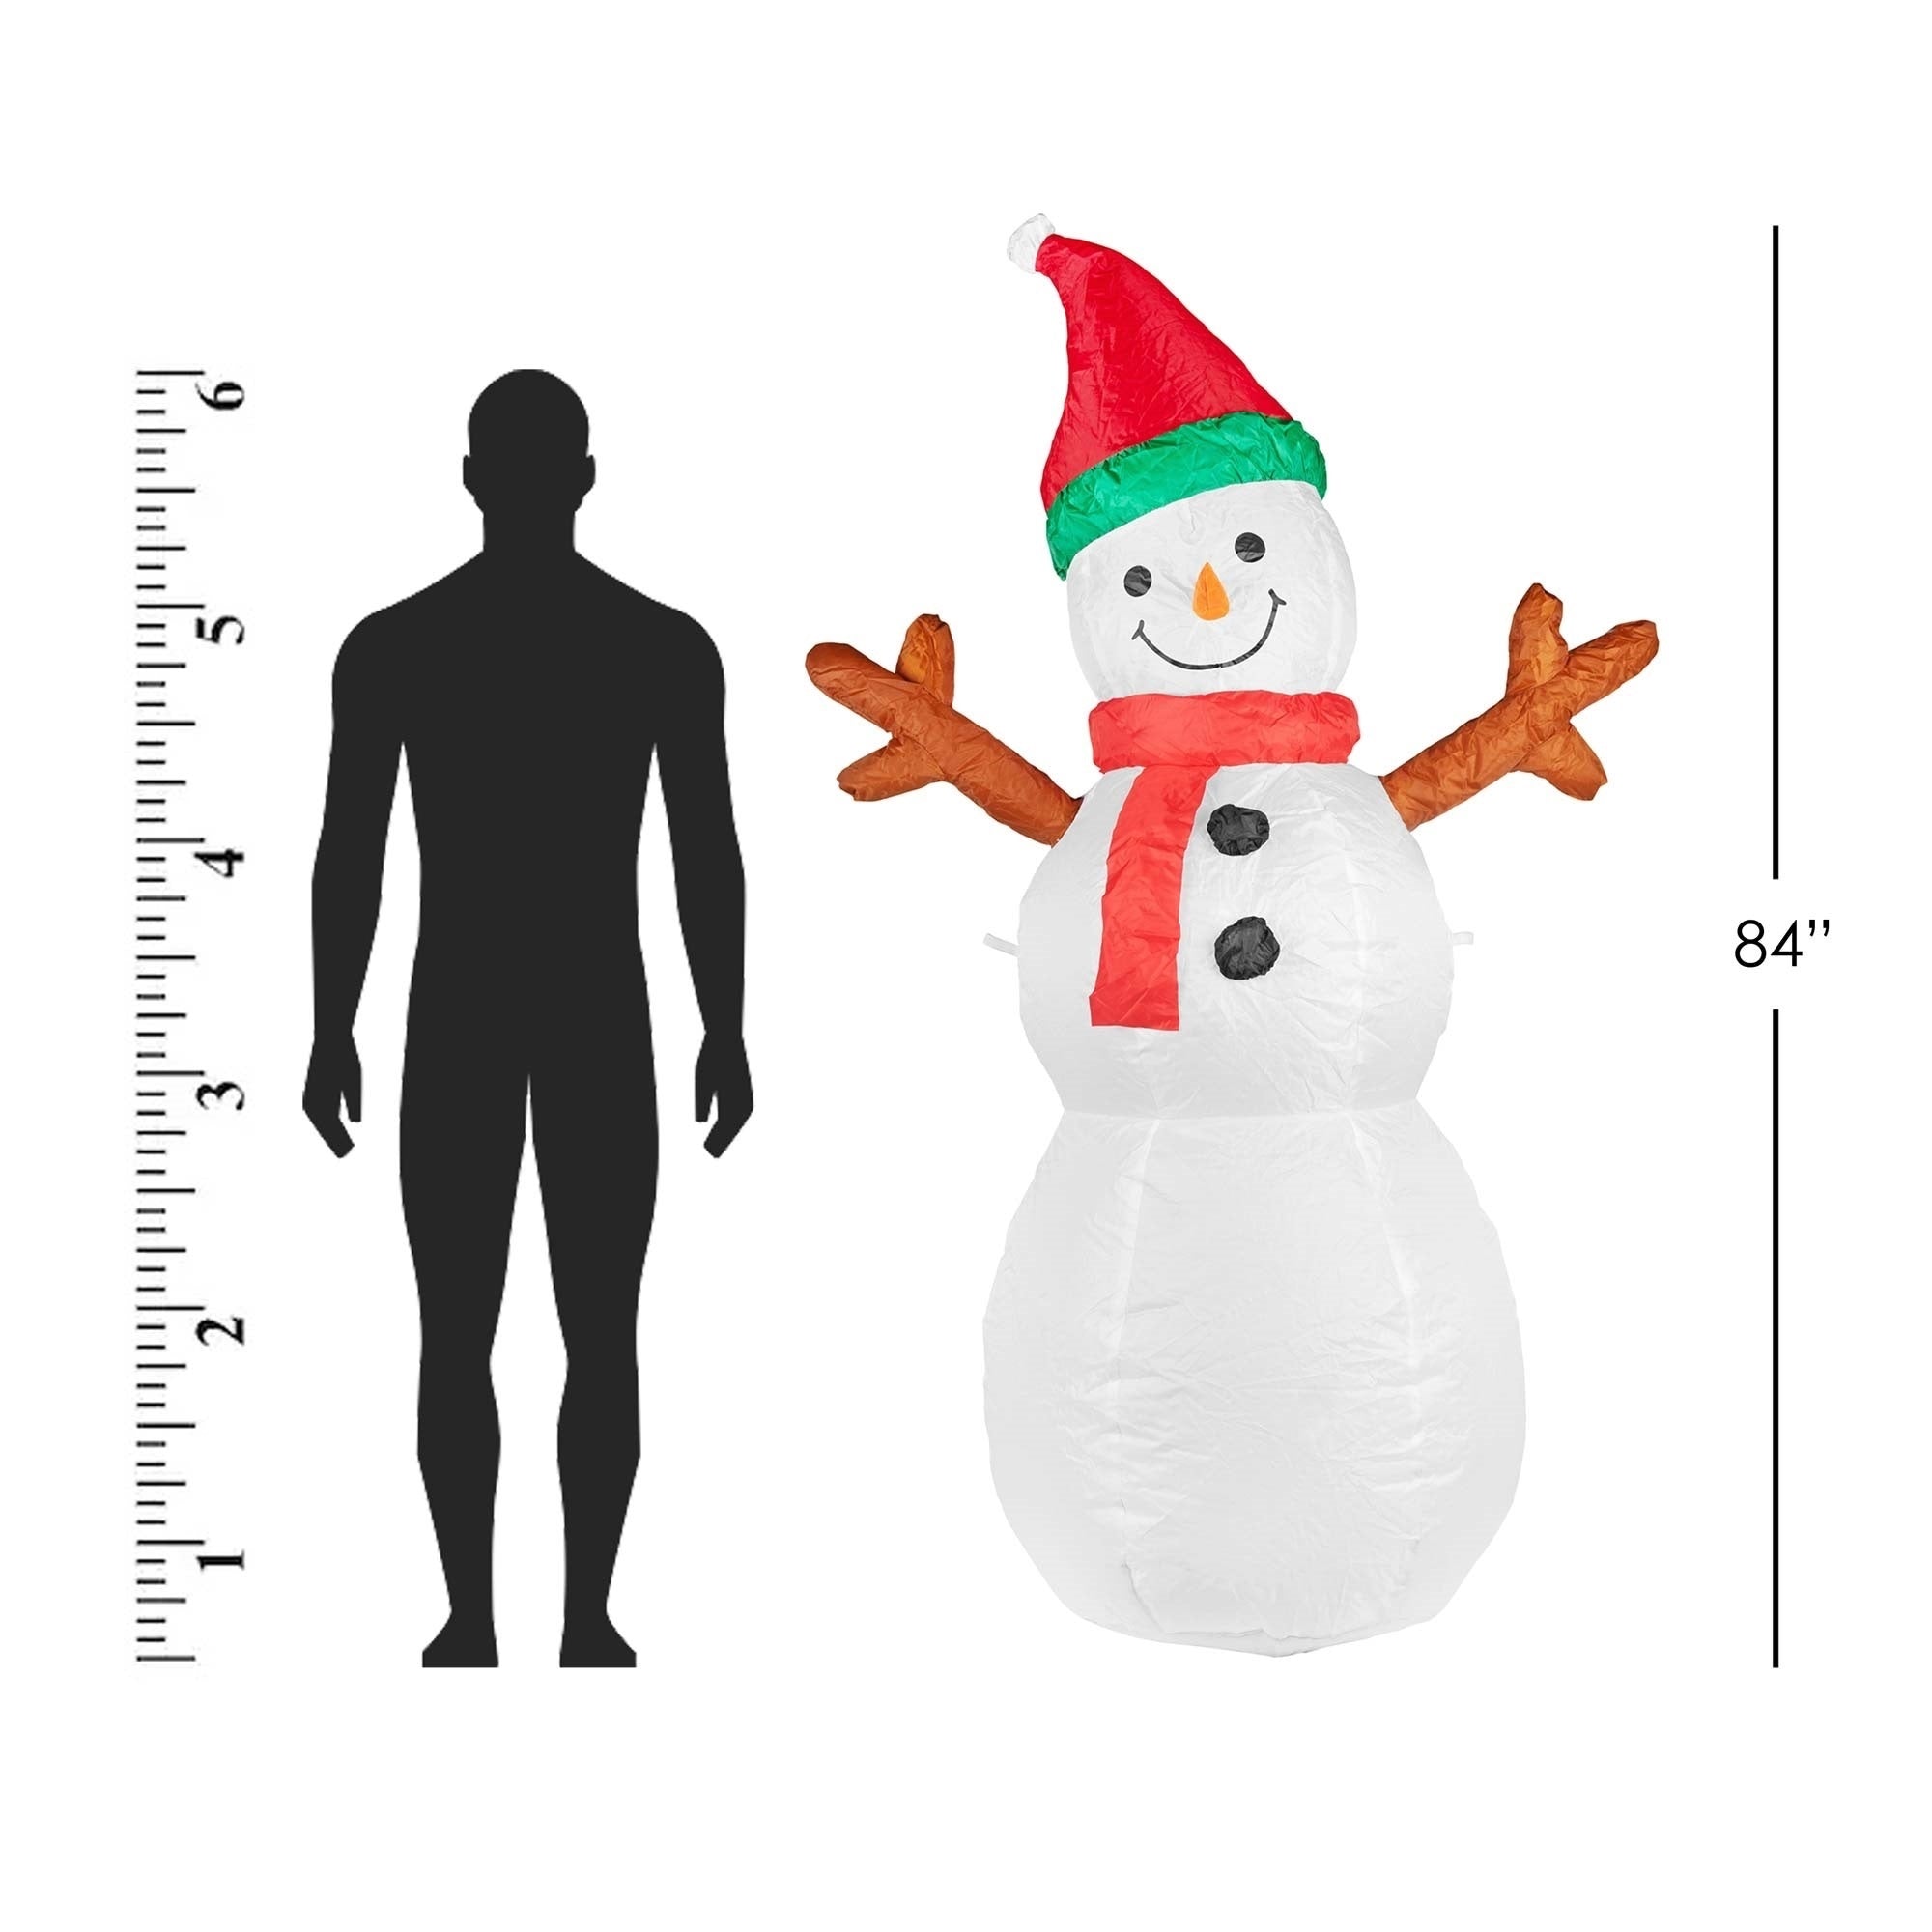 ProductWorks Candy Cane Lane Inflatable Snowman Outdoor Holiday Display, 7-Foot